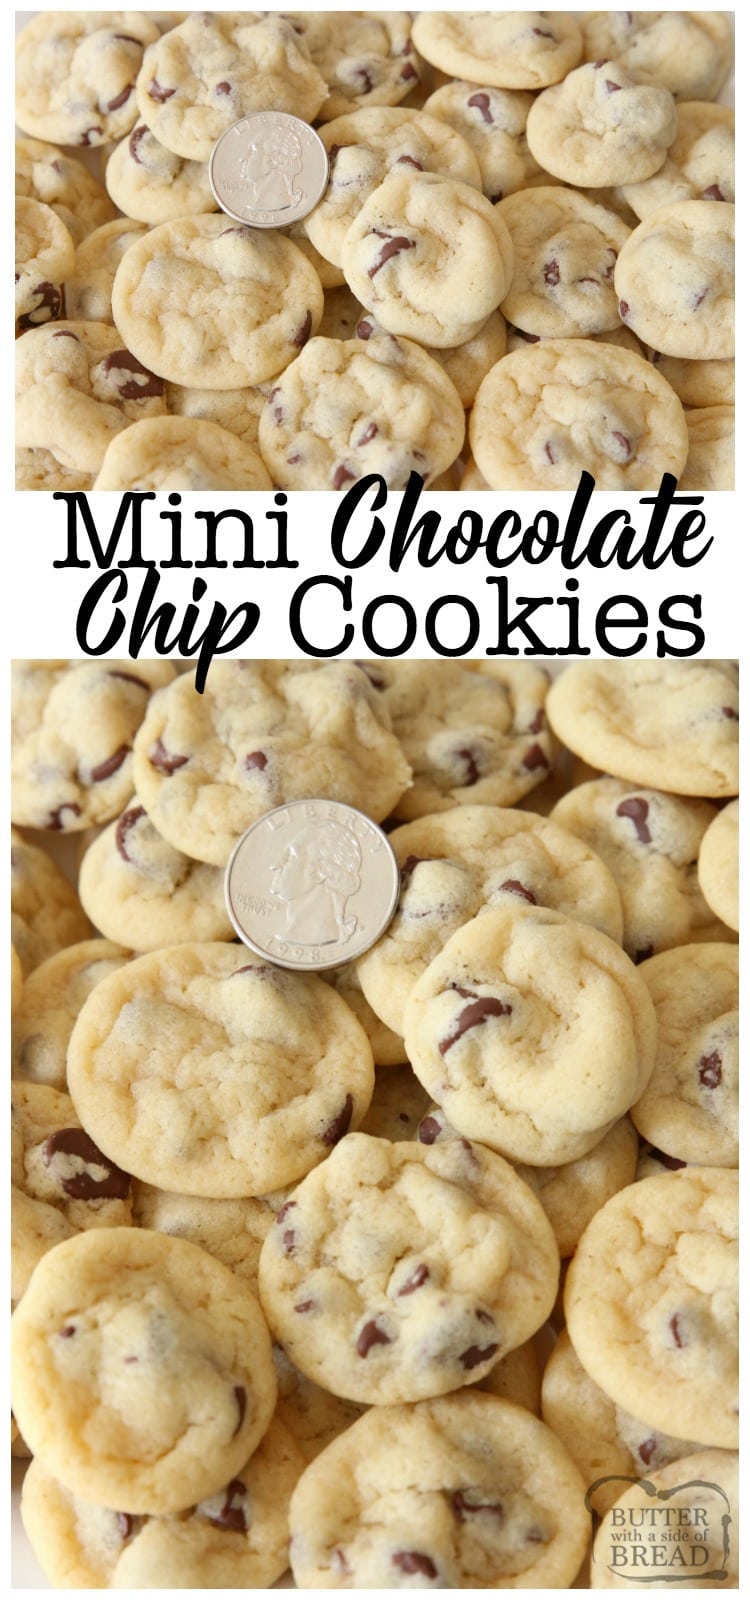 Mini Chocolate Chip Cookies are teeny tiny chocolate chip #cookies about the size of a quarter! Soft, chewy poppable cookies that are perfect for parties. Easy cookie #recipe from Butter With A Side of Bread #chocolate #chocolatechip 